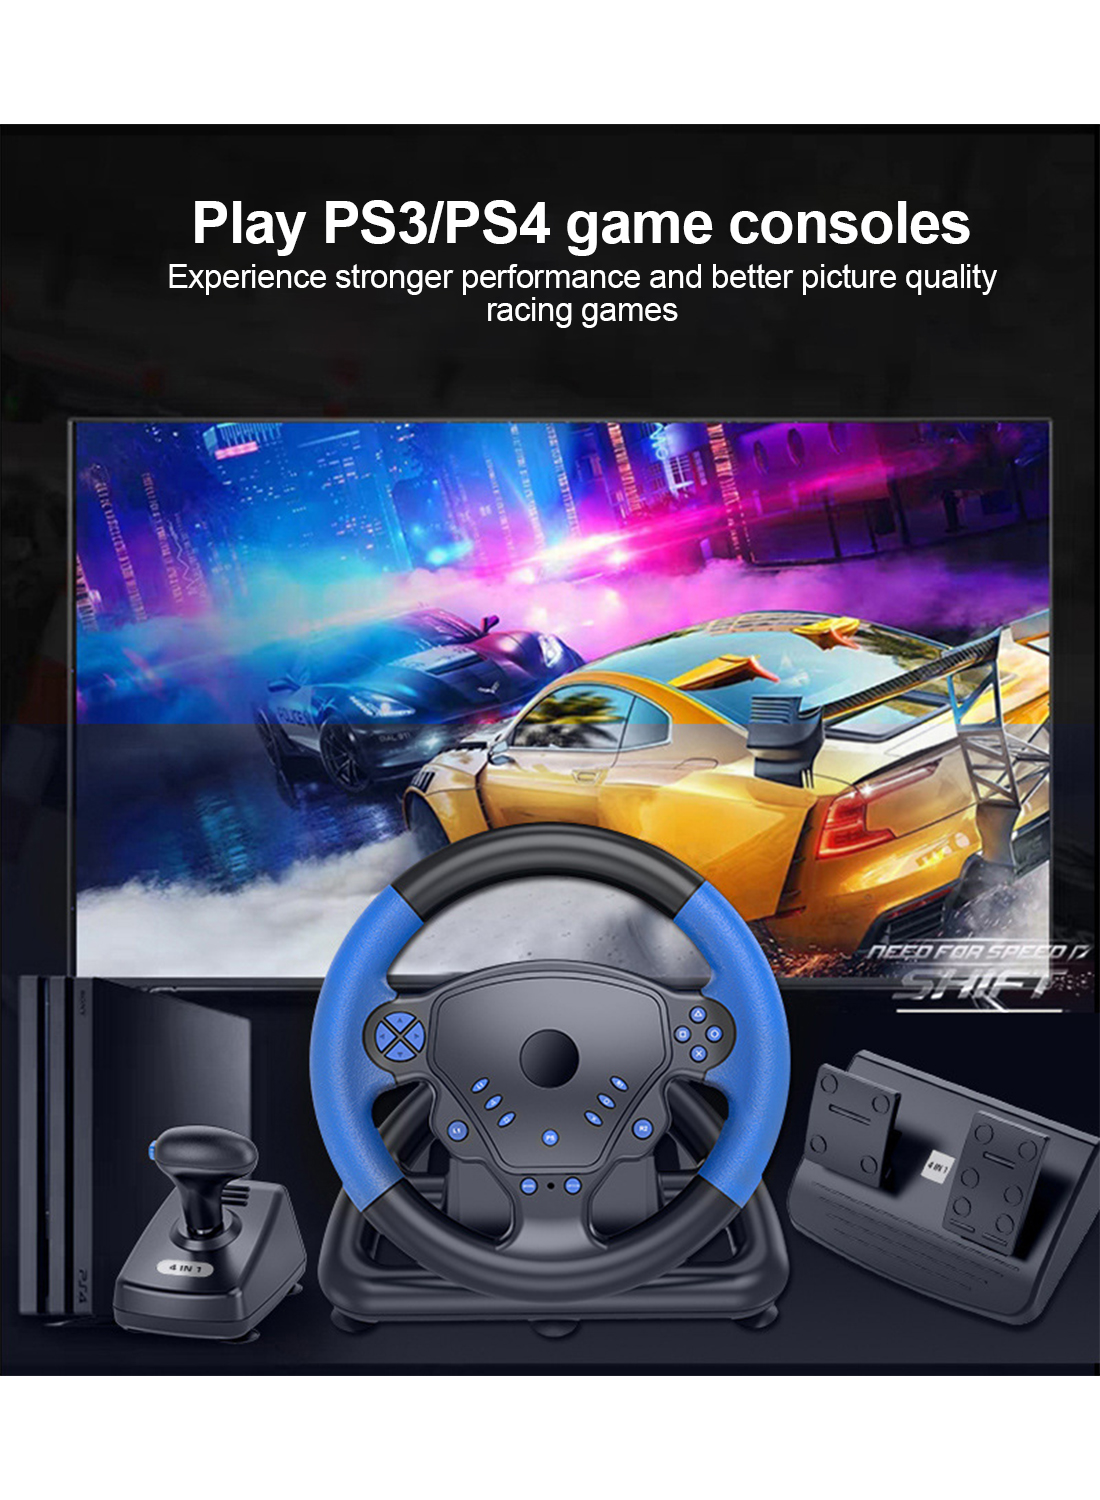 180 Degree Gaming Steering Wheel with Pedals and Gear Lever Supports wired or Bluetooth Connection for PS4/PS3/Pc/Android/IOS